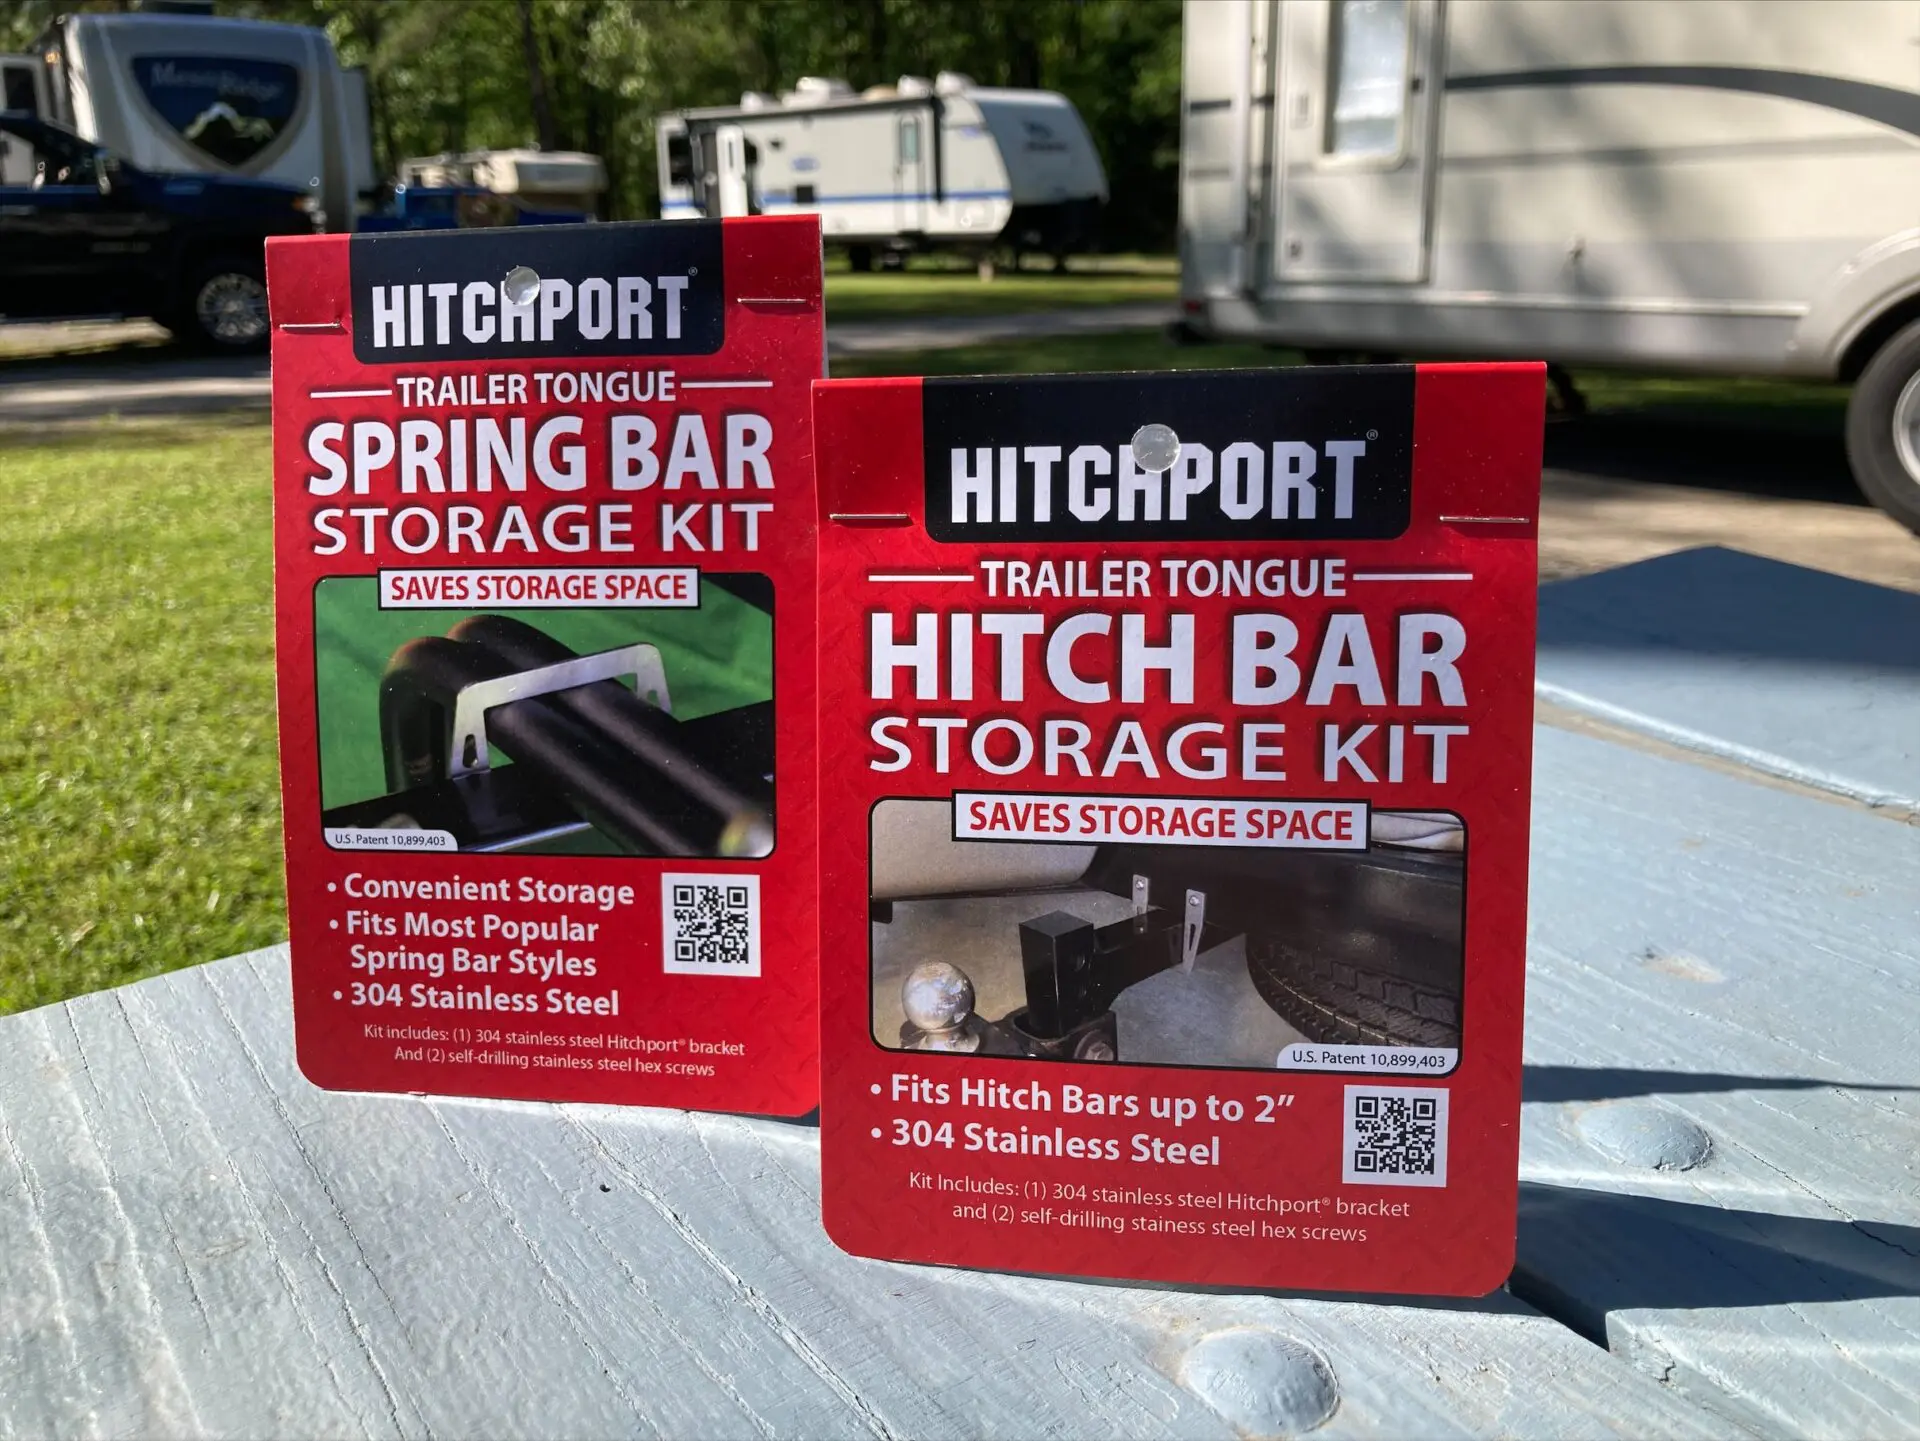 HITCHPORT Hitch Bar and Spring Bar Storage Kits